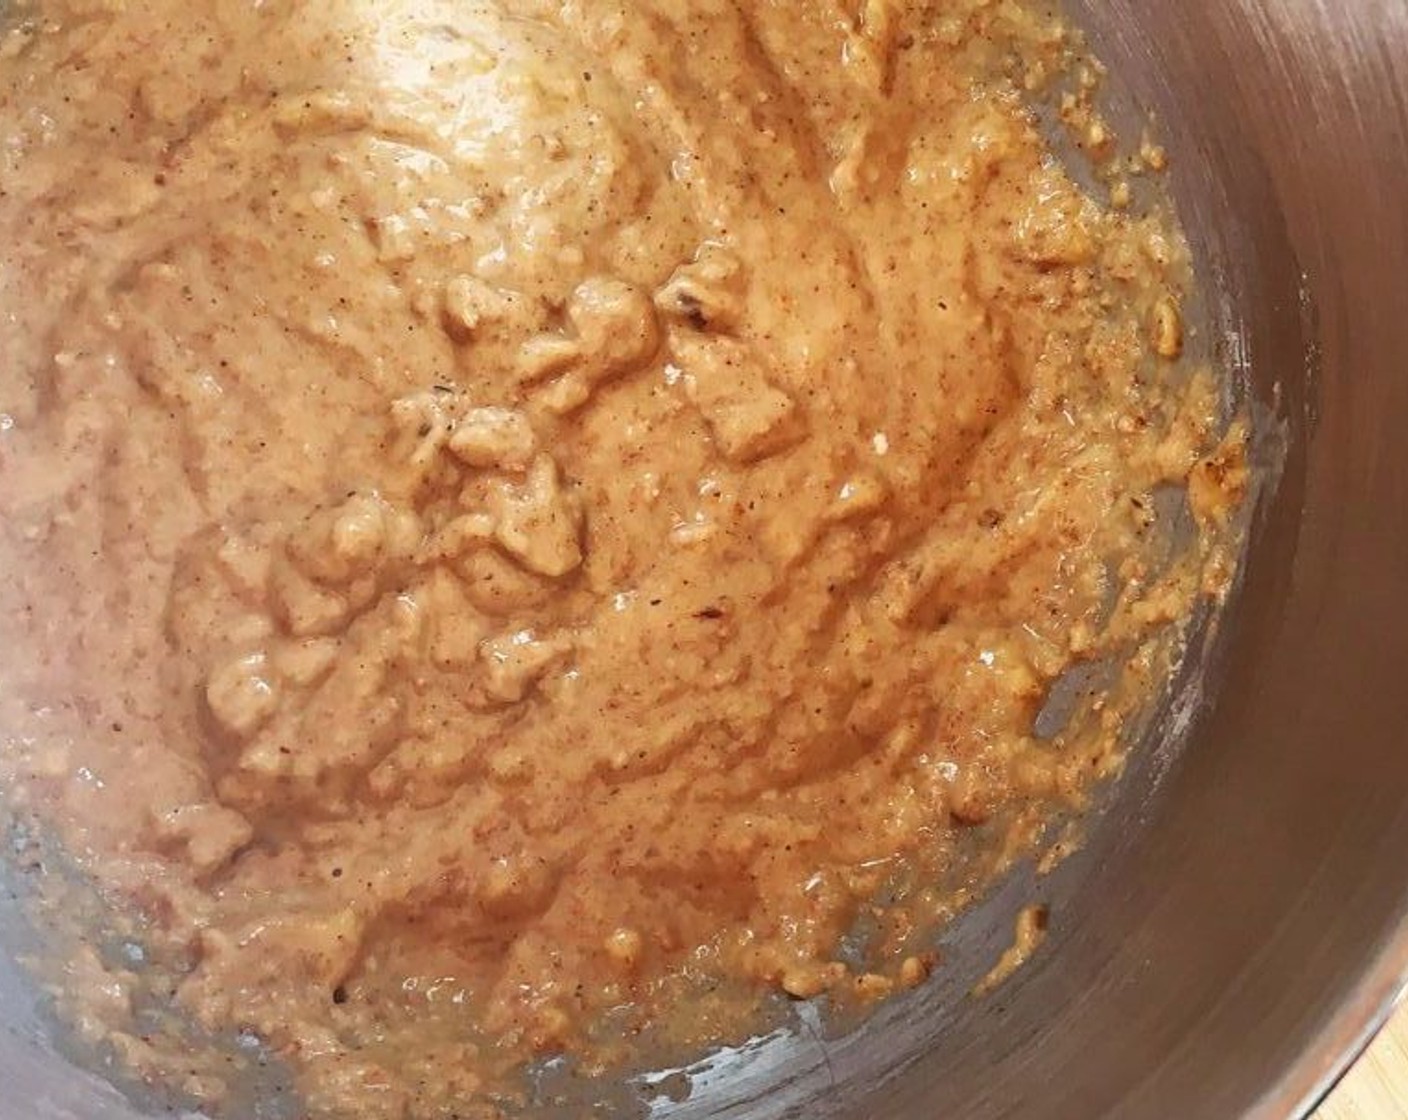 step 3 Stir in the Gluten-Free Oat Flour (2/3 cup), Almond Flour (2/3 cup), Ground Cinnamon (1/2 tsp), and Baking Powder (1 tsp).